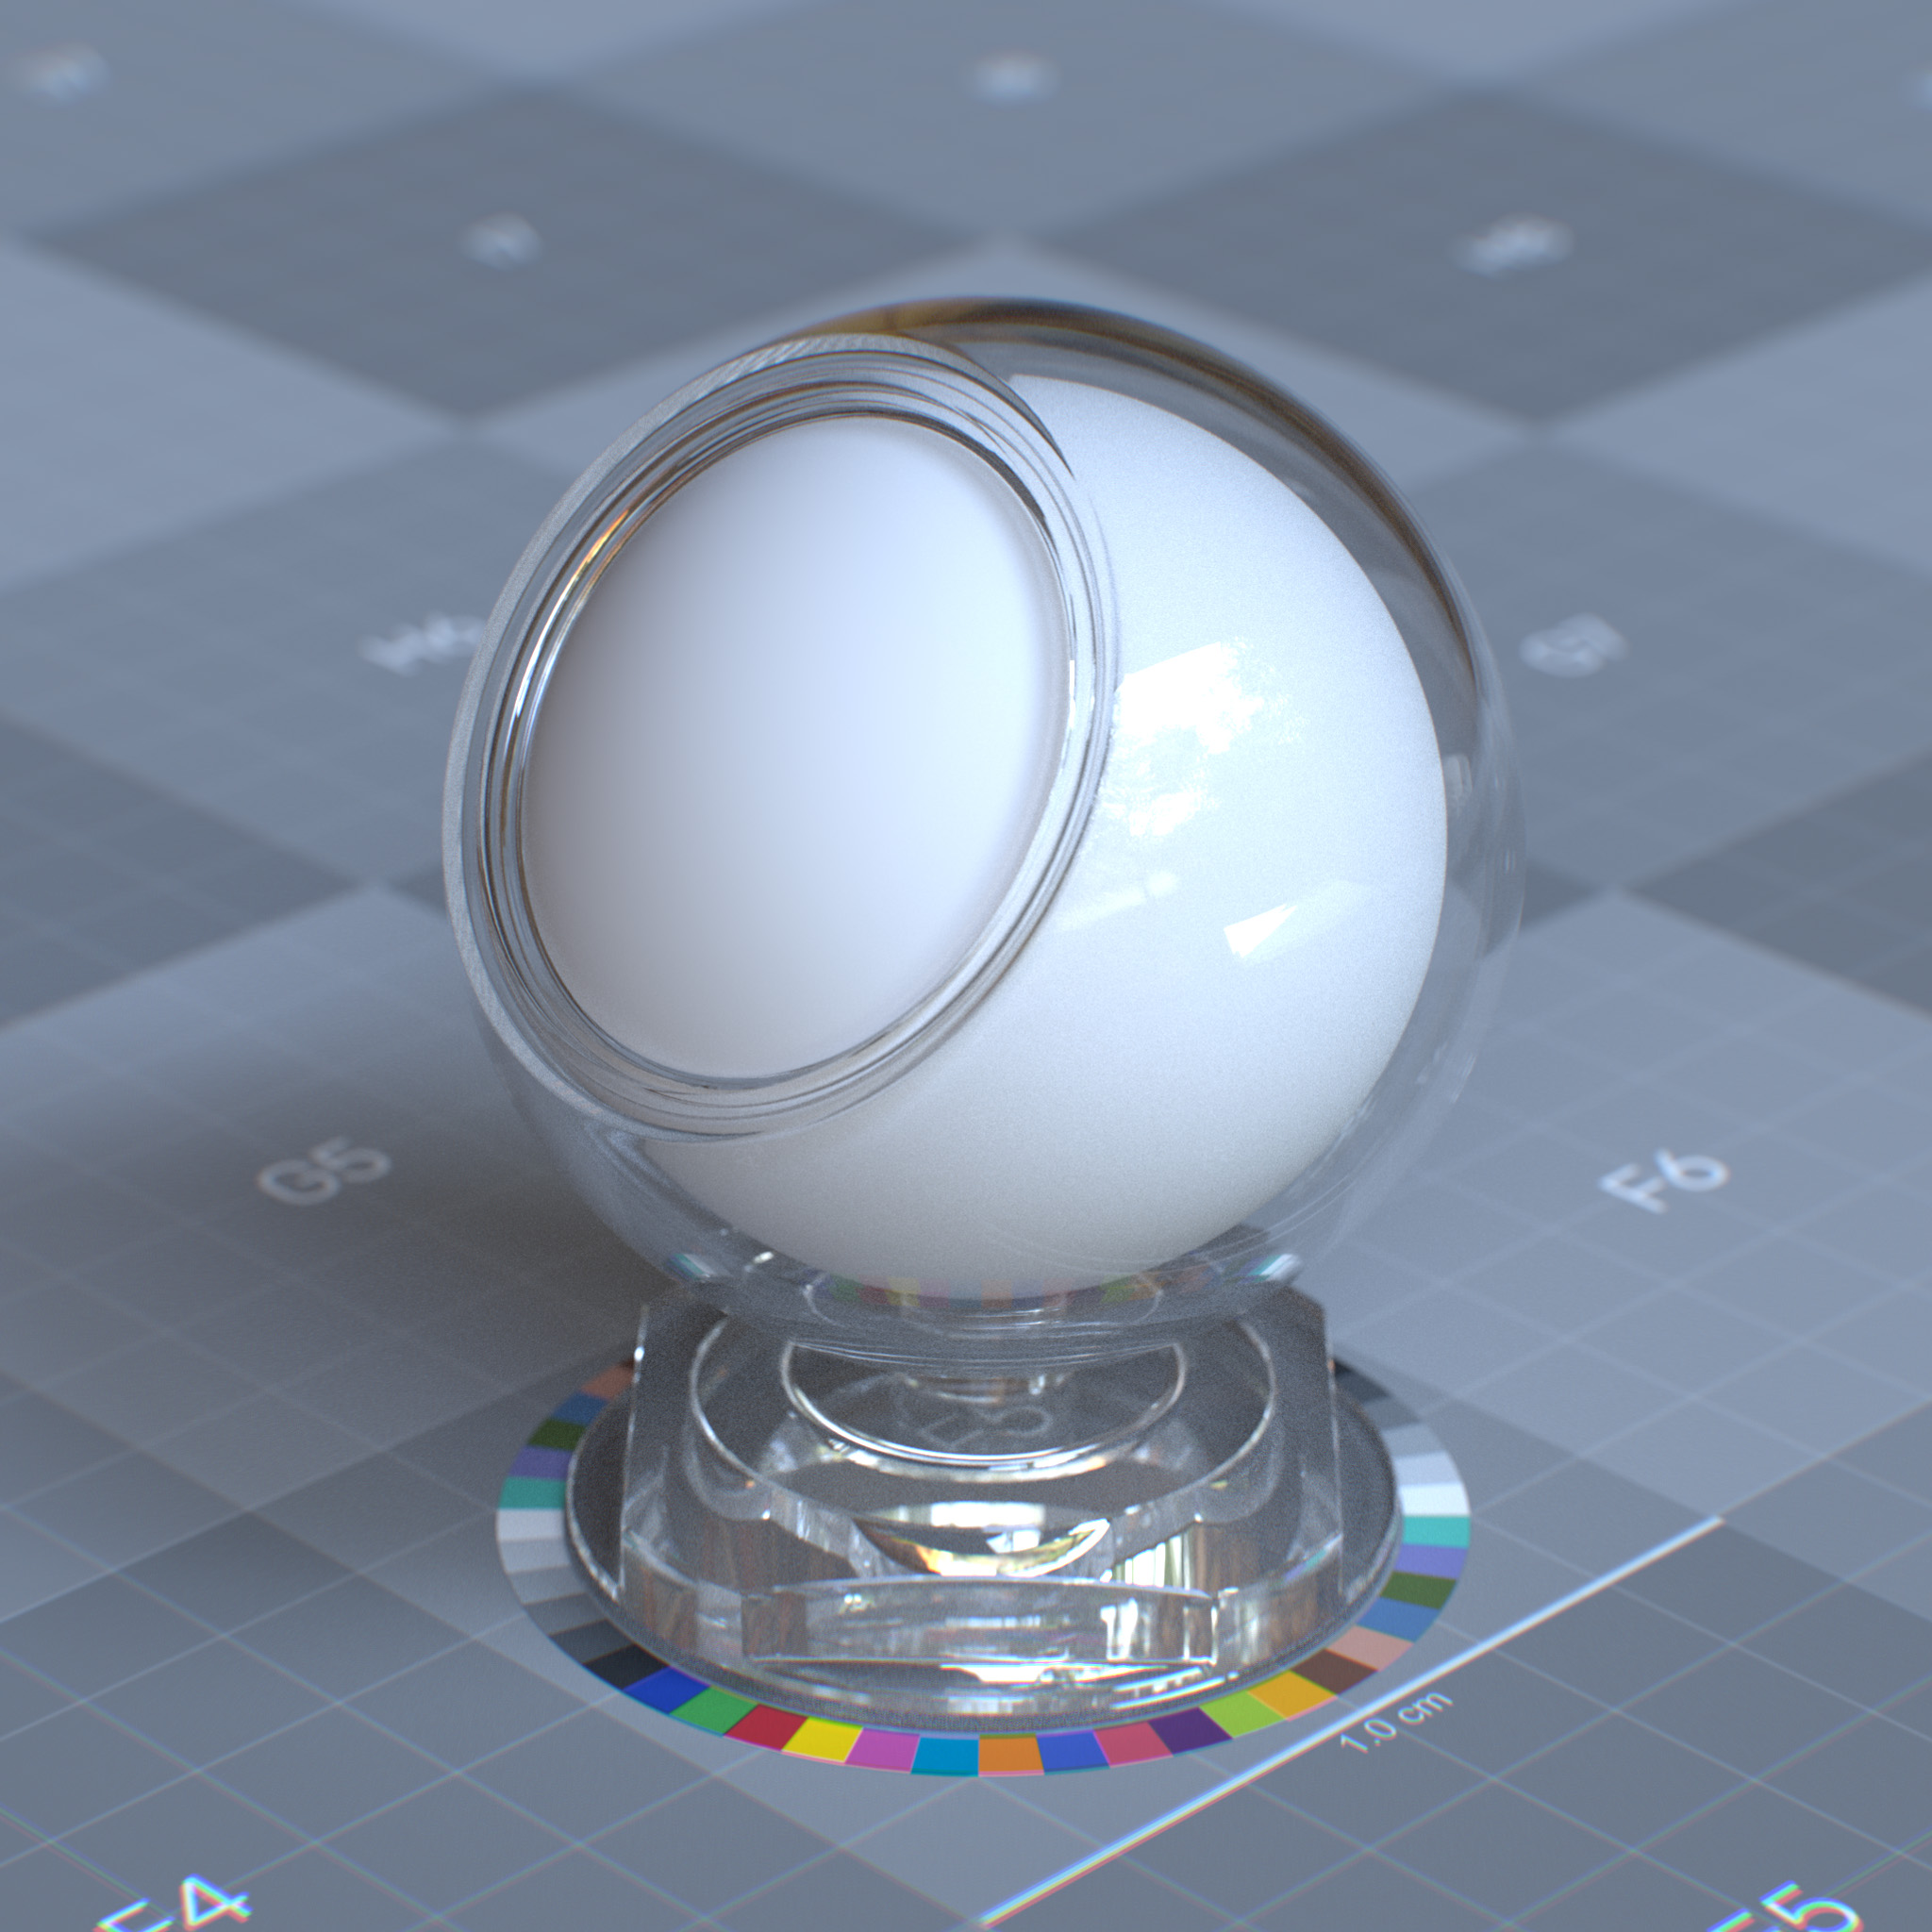 rtx_material_omnisurfacebase_specular_transmission_16_transmission_bounces_64_max_bounces